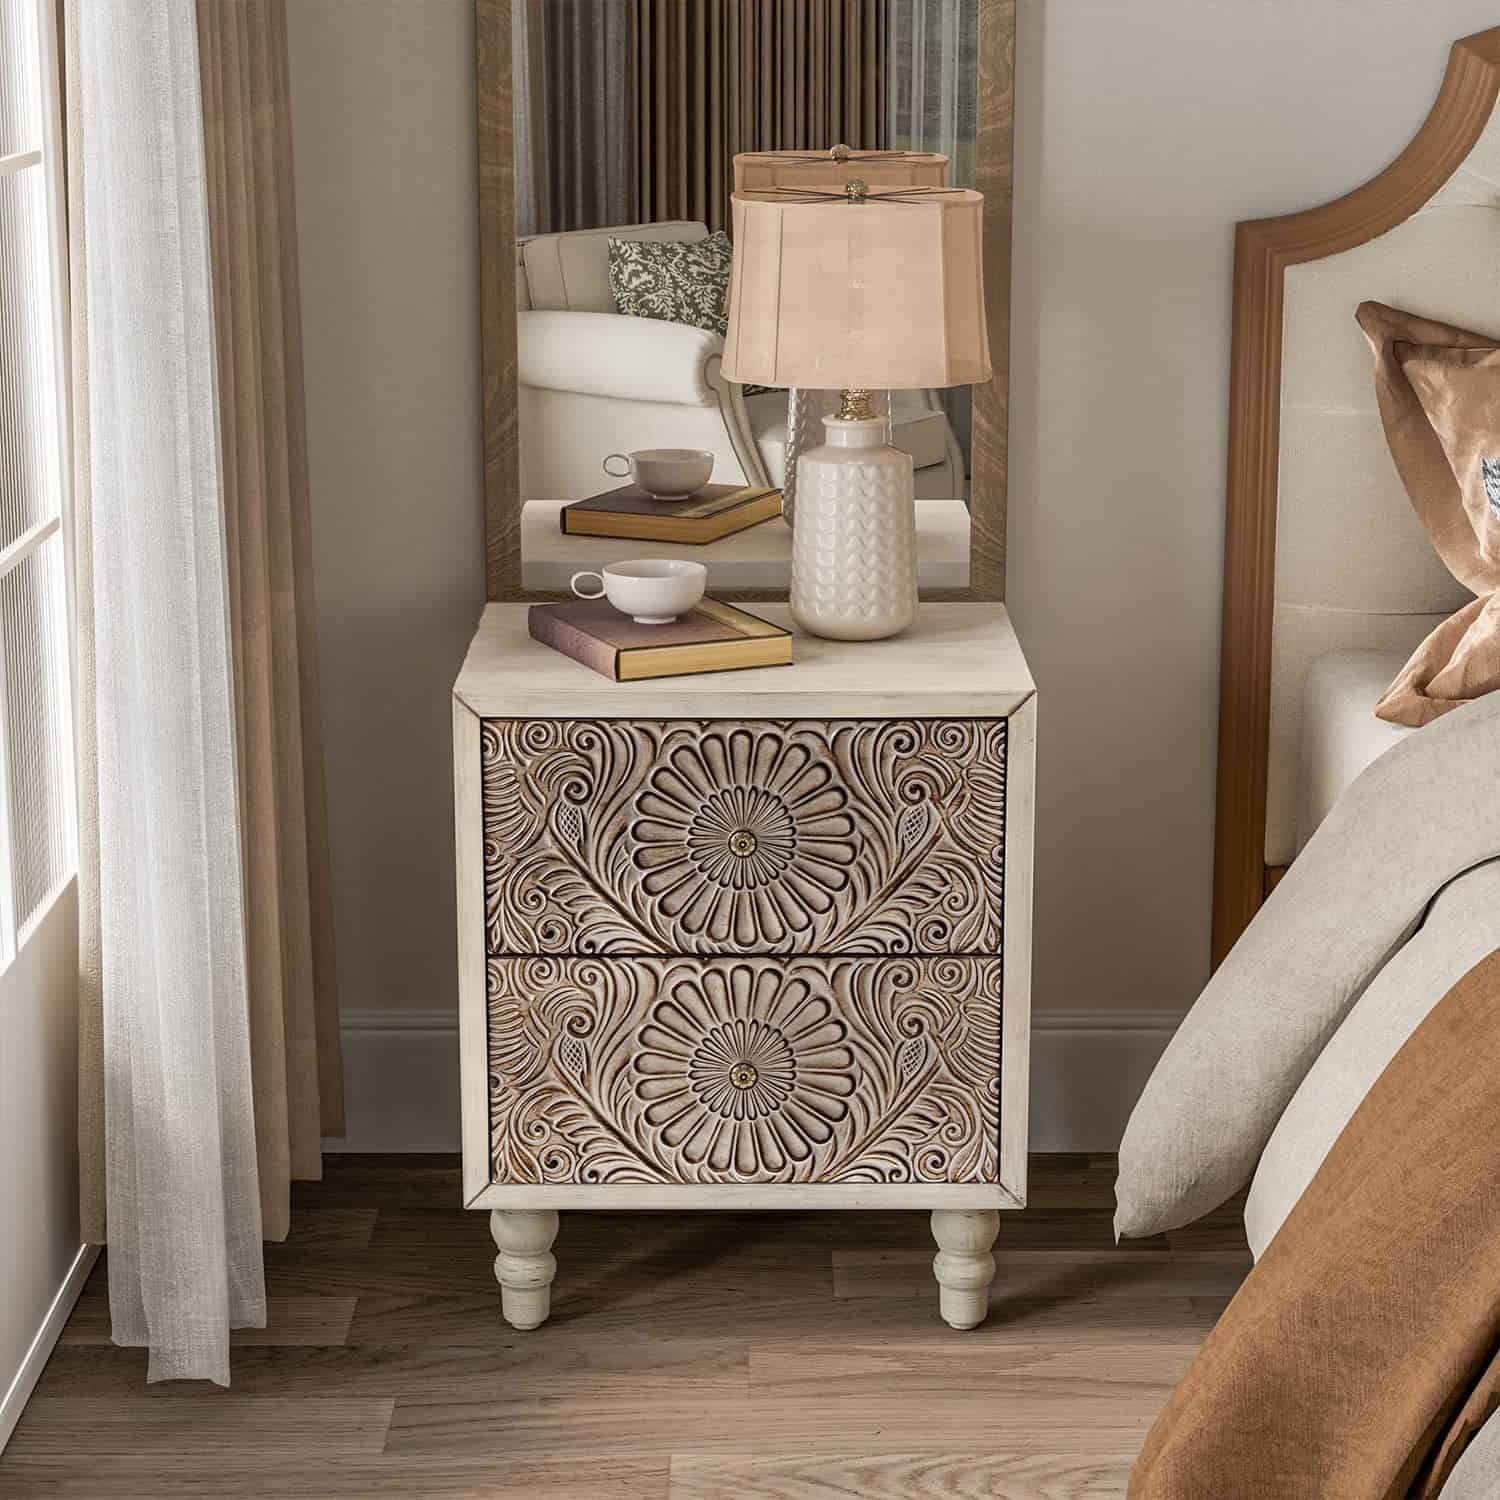 Bohemian nightstand in cream finish with carved front drawer faces and decorative pulls on spindle style legs.